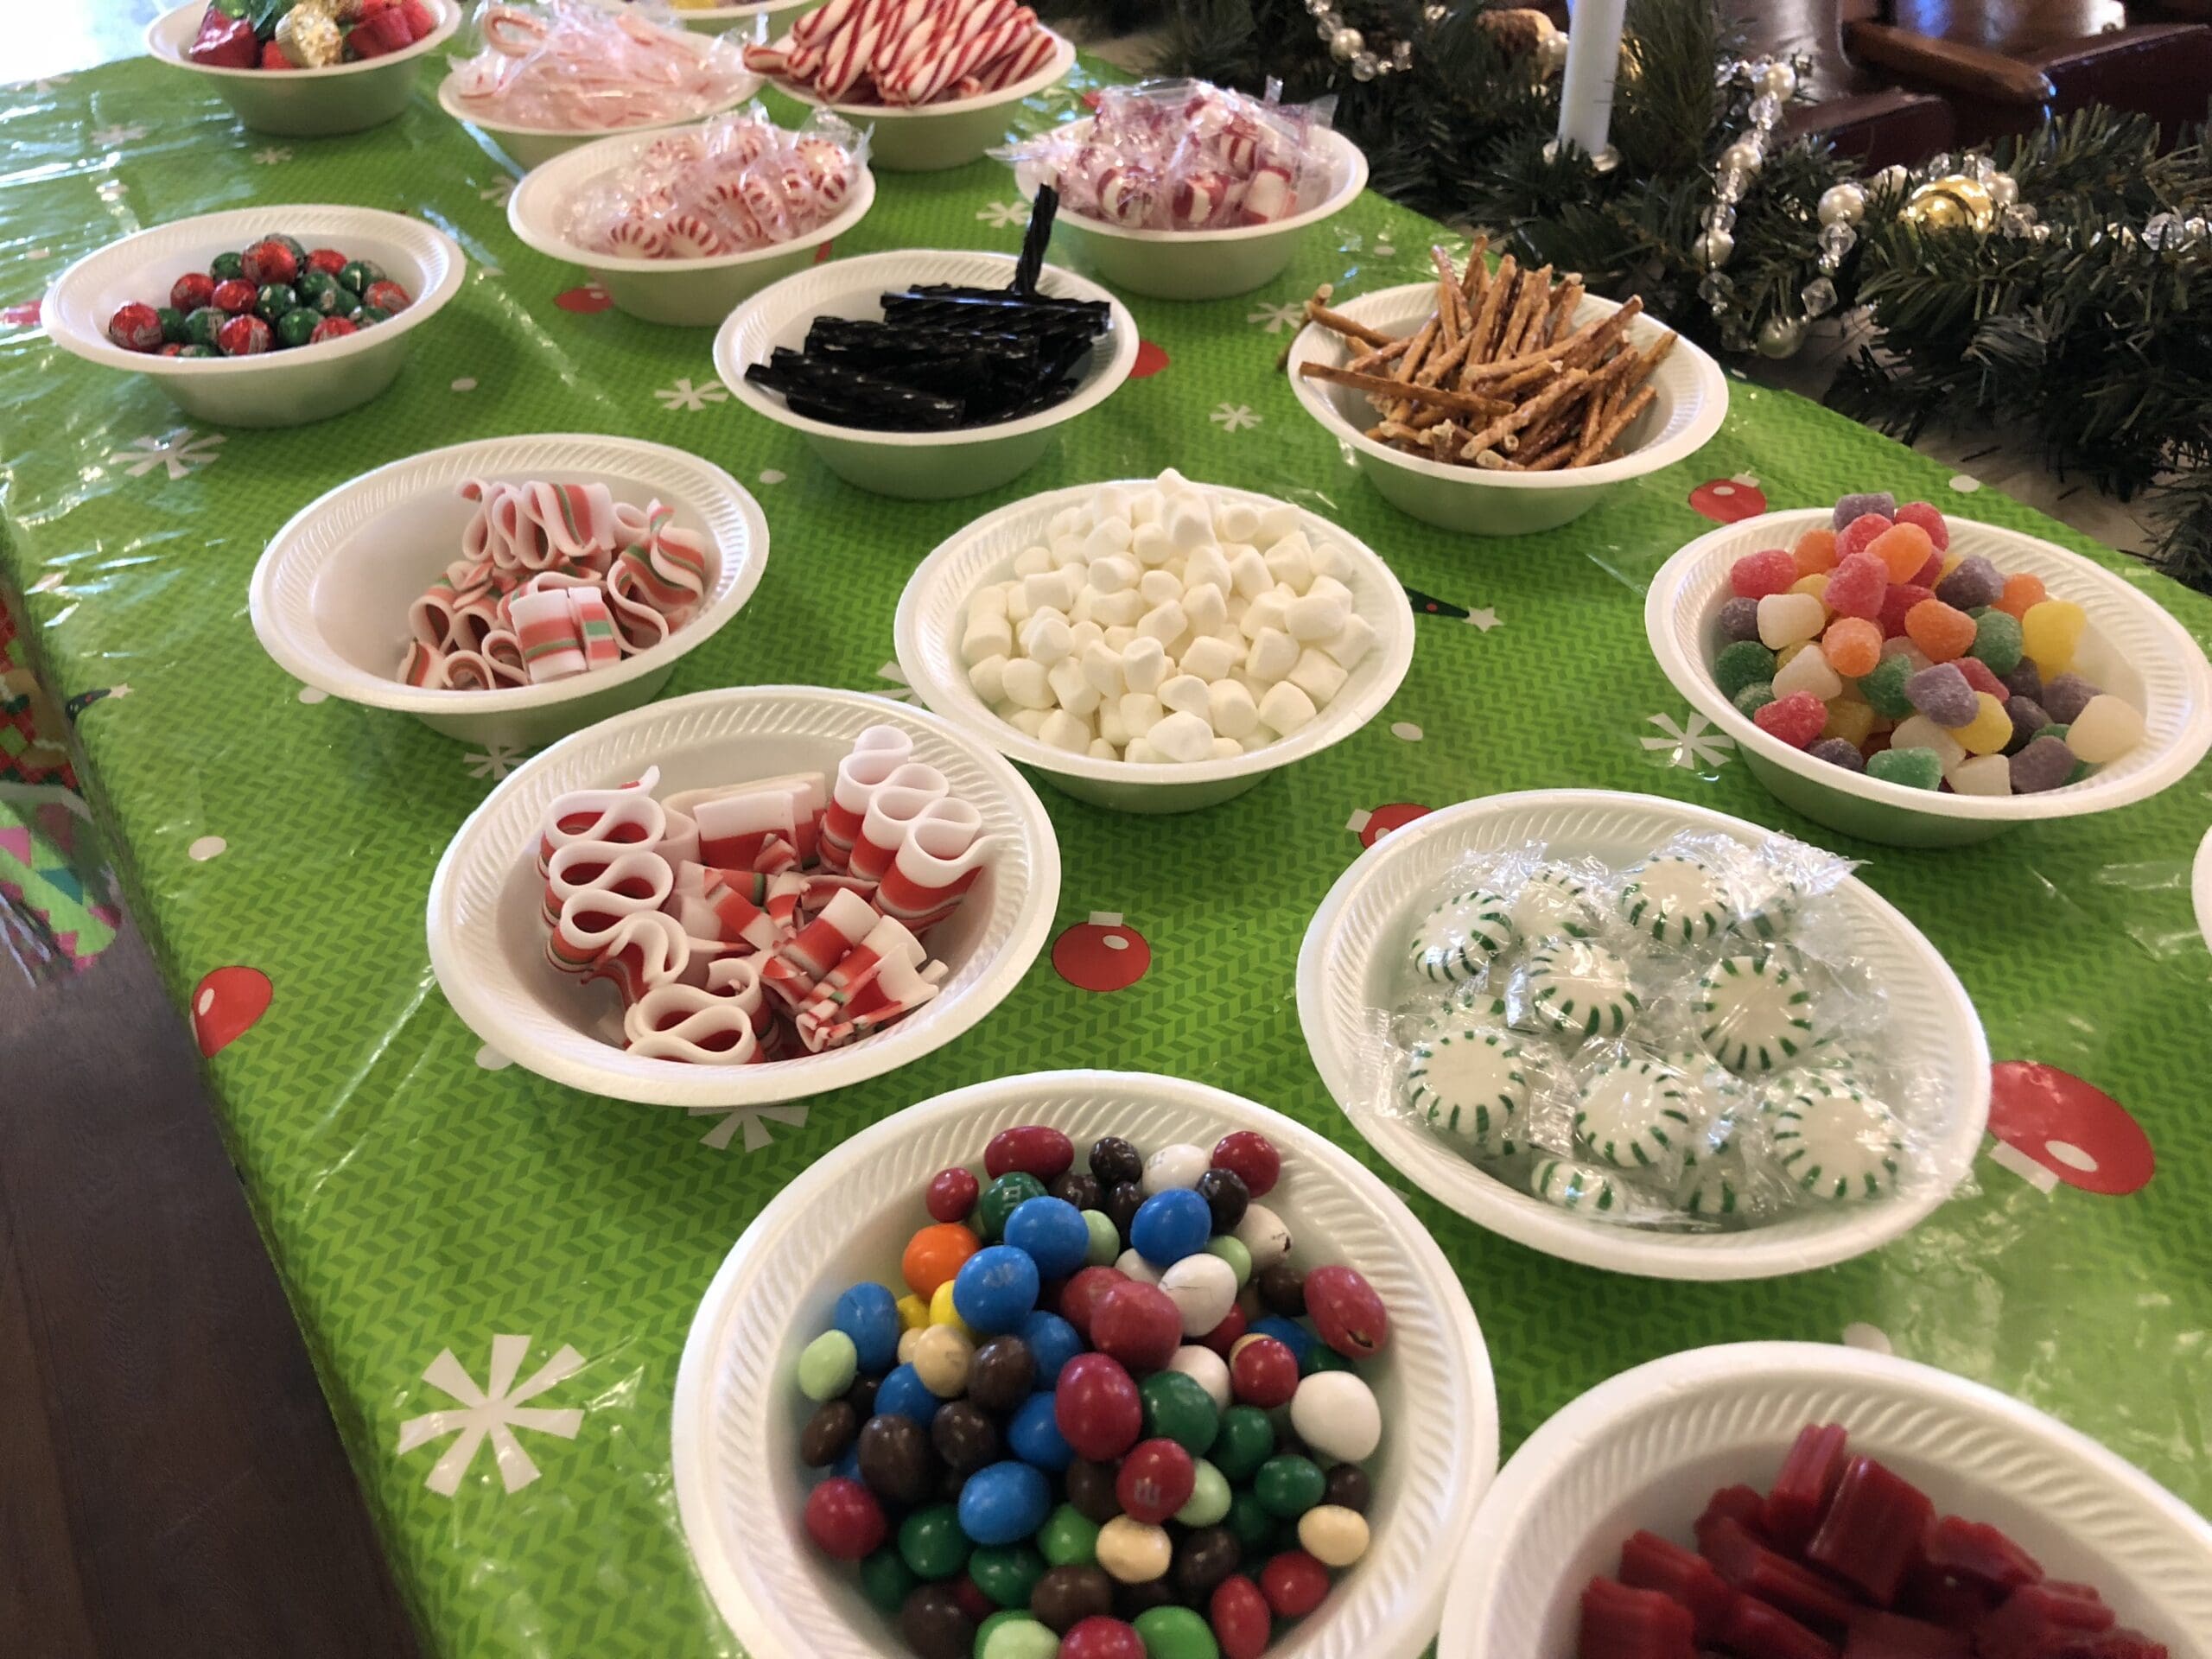 A variety of candies displayed on paper plates on a festive tablecloth at Heritage Square, Oxnard, including gummy candies, marshmallows, and licorice.